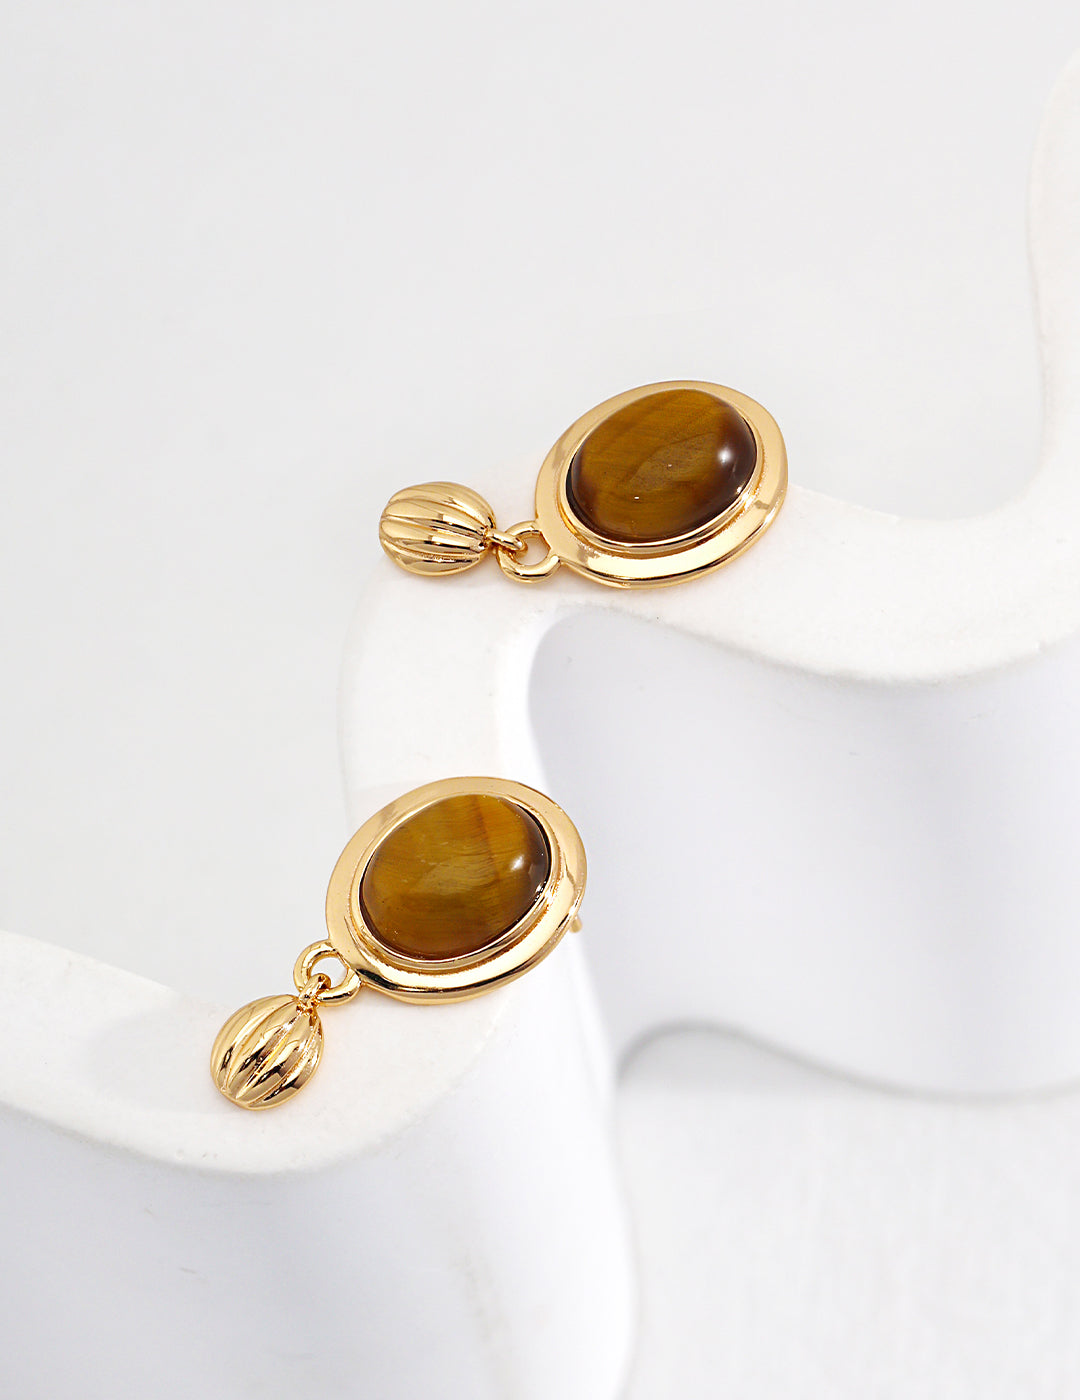 Exquisite 925 Silver Tiger Eye Earrings in Antique Gold Finish - Timeless Elegance